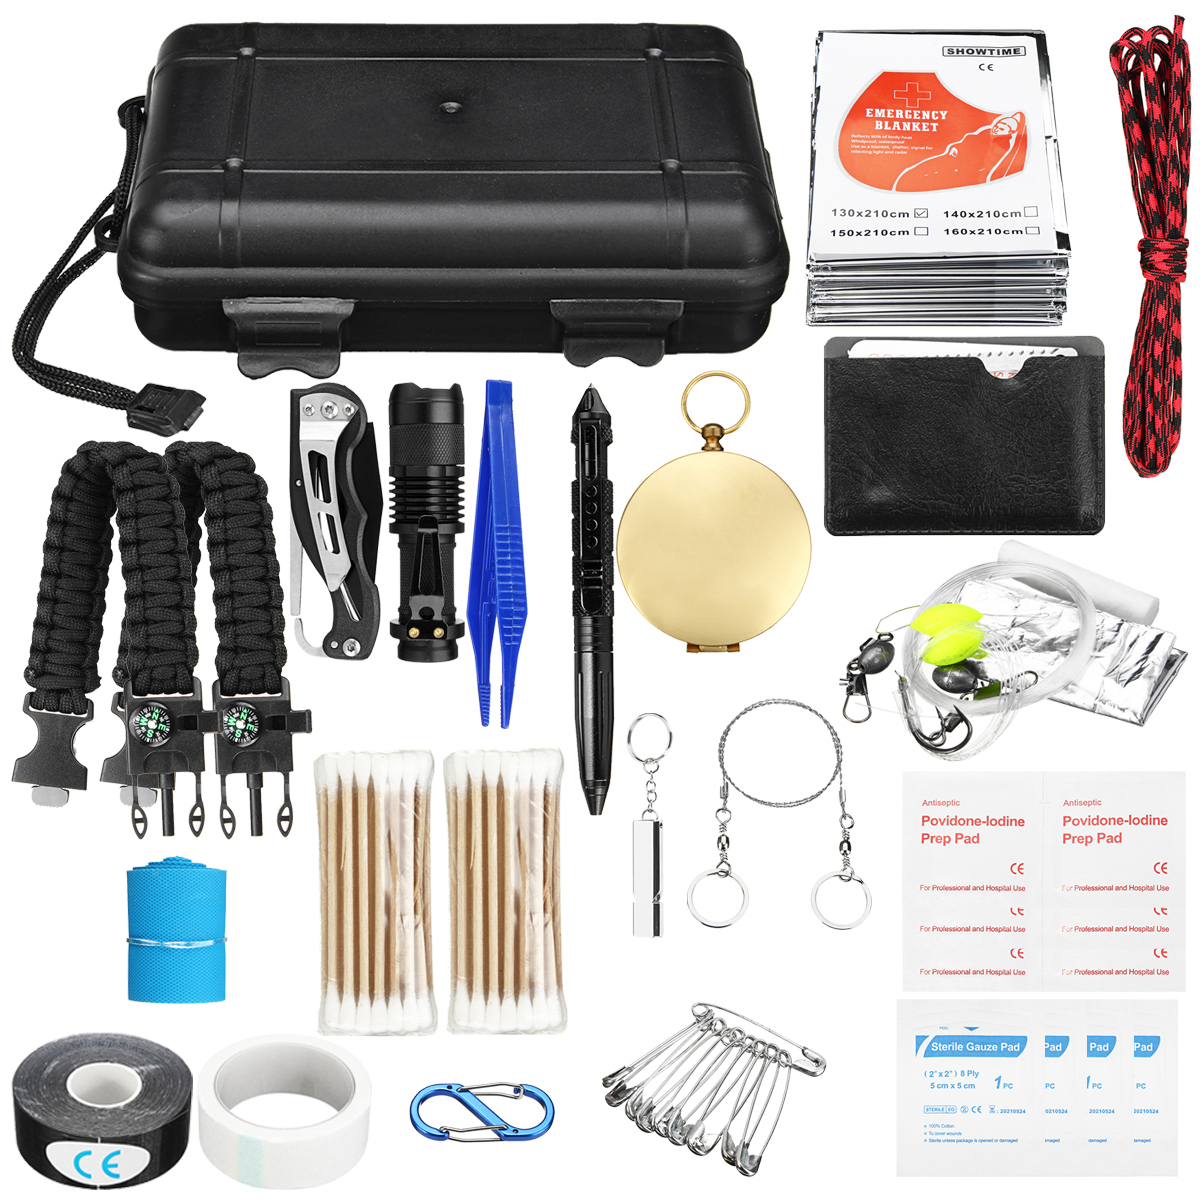 213Pcs Survival Tools Kit Emergency Survival Kit Multi-Tools First Aid Supplies Survival Gear EDC Gadget Tool Set  for Camping Hiking Hunting SOS